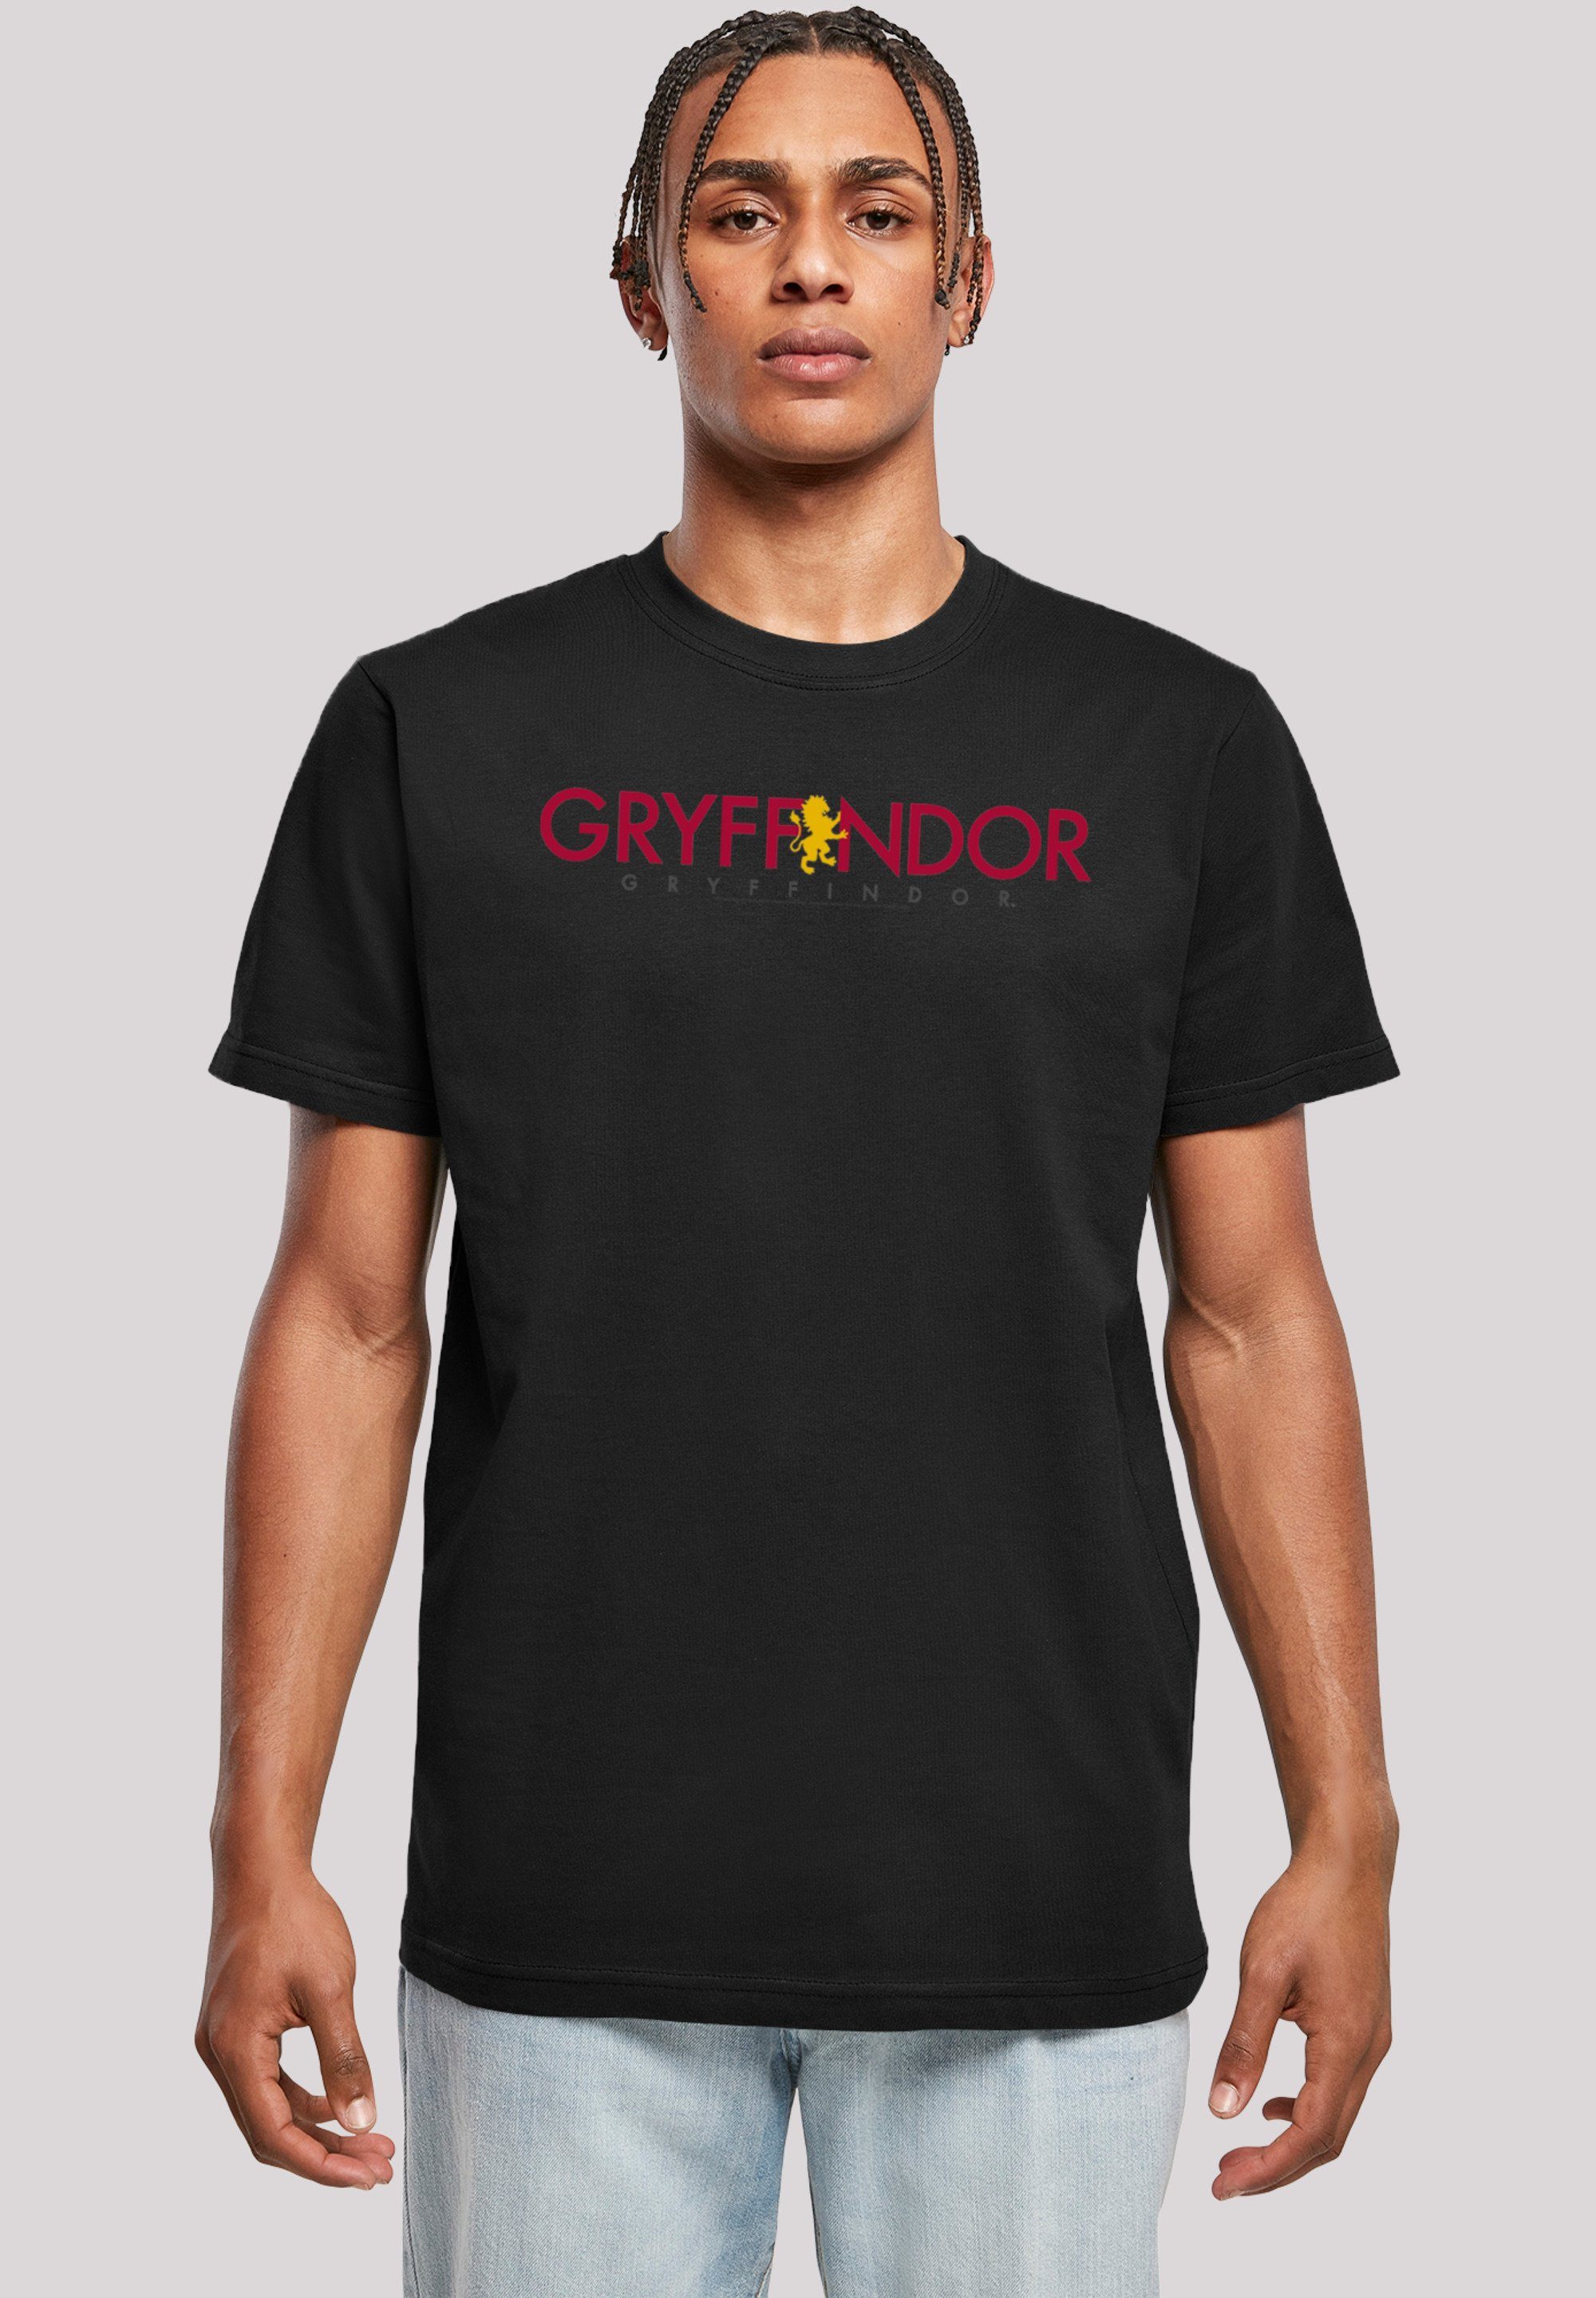 F4NT4STIC T-Shirt Harry Potter Gryffindor Print Text